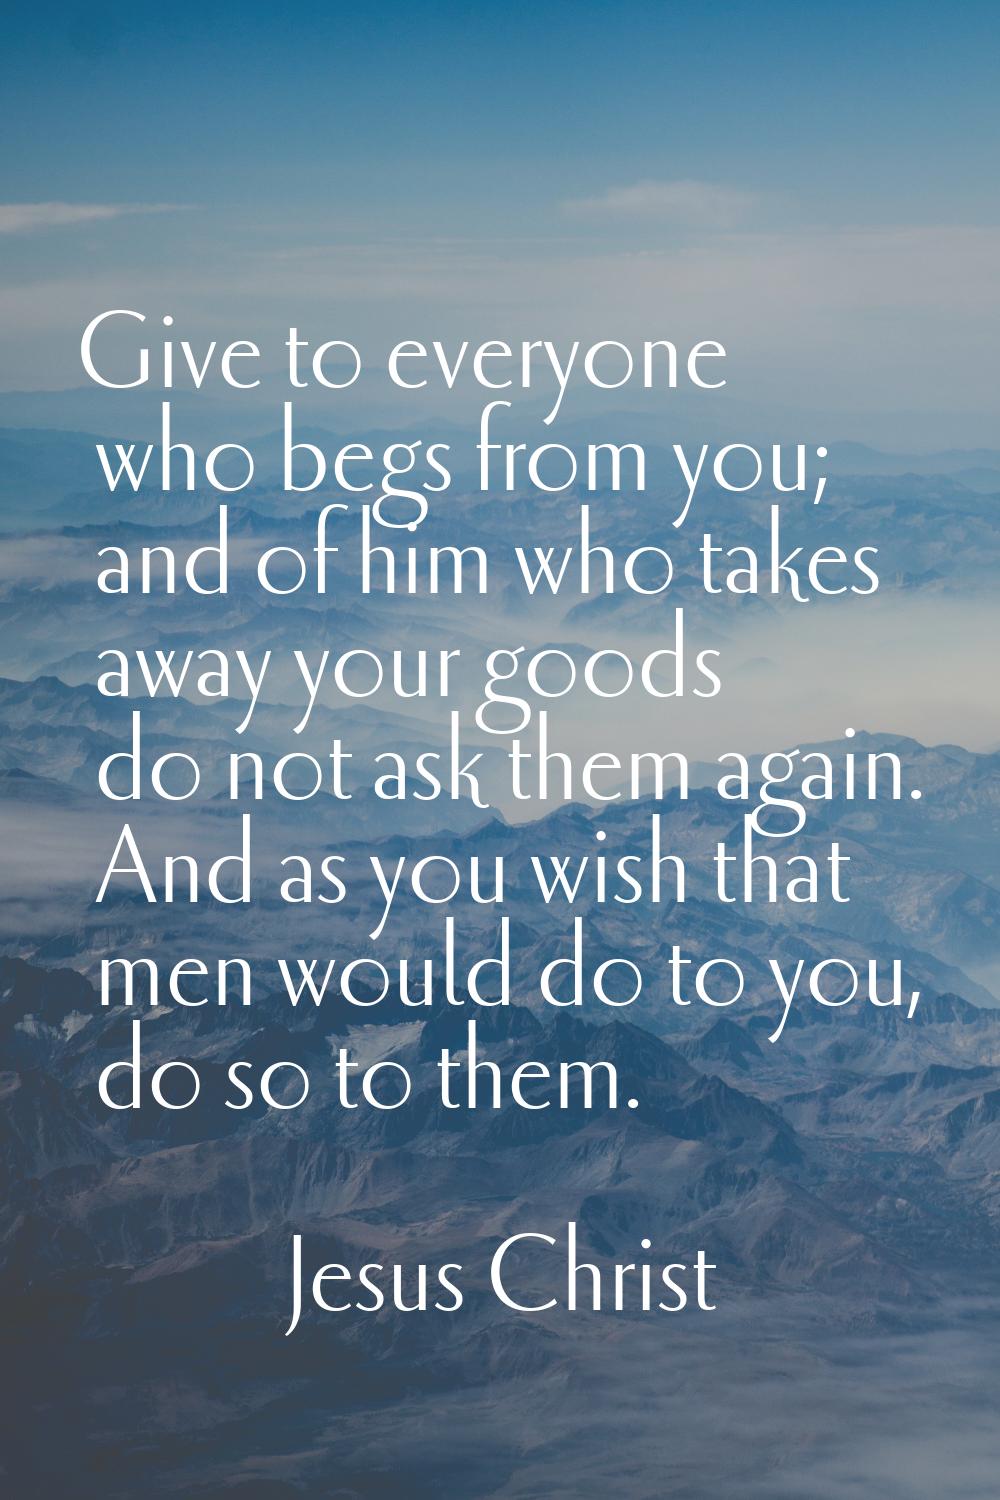 Give to everyone who begs from you; and of him who takes away your goods do not ask them again. And